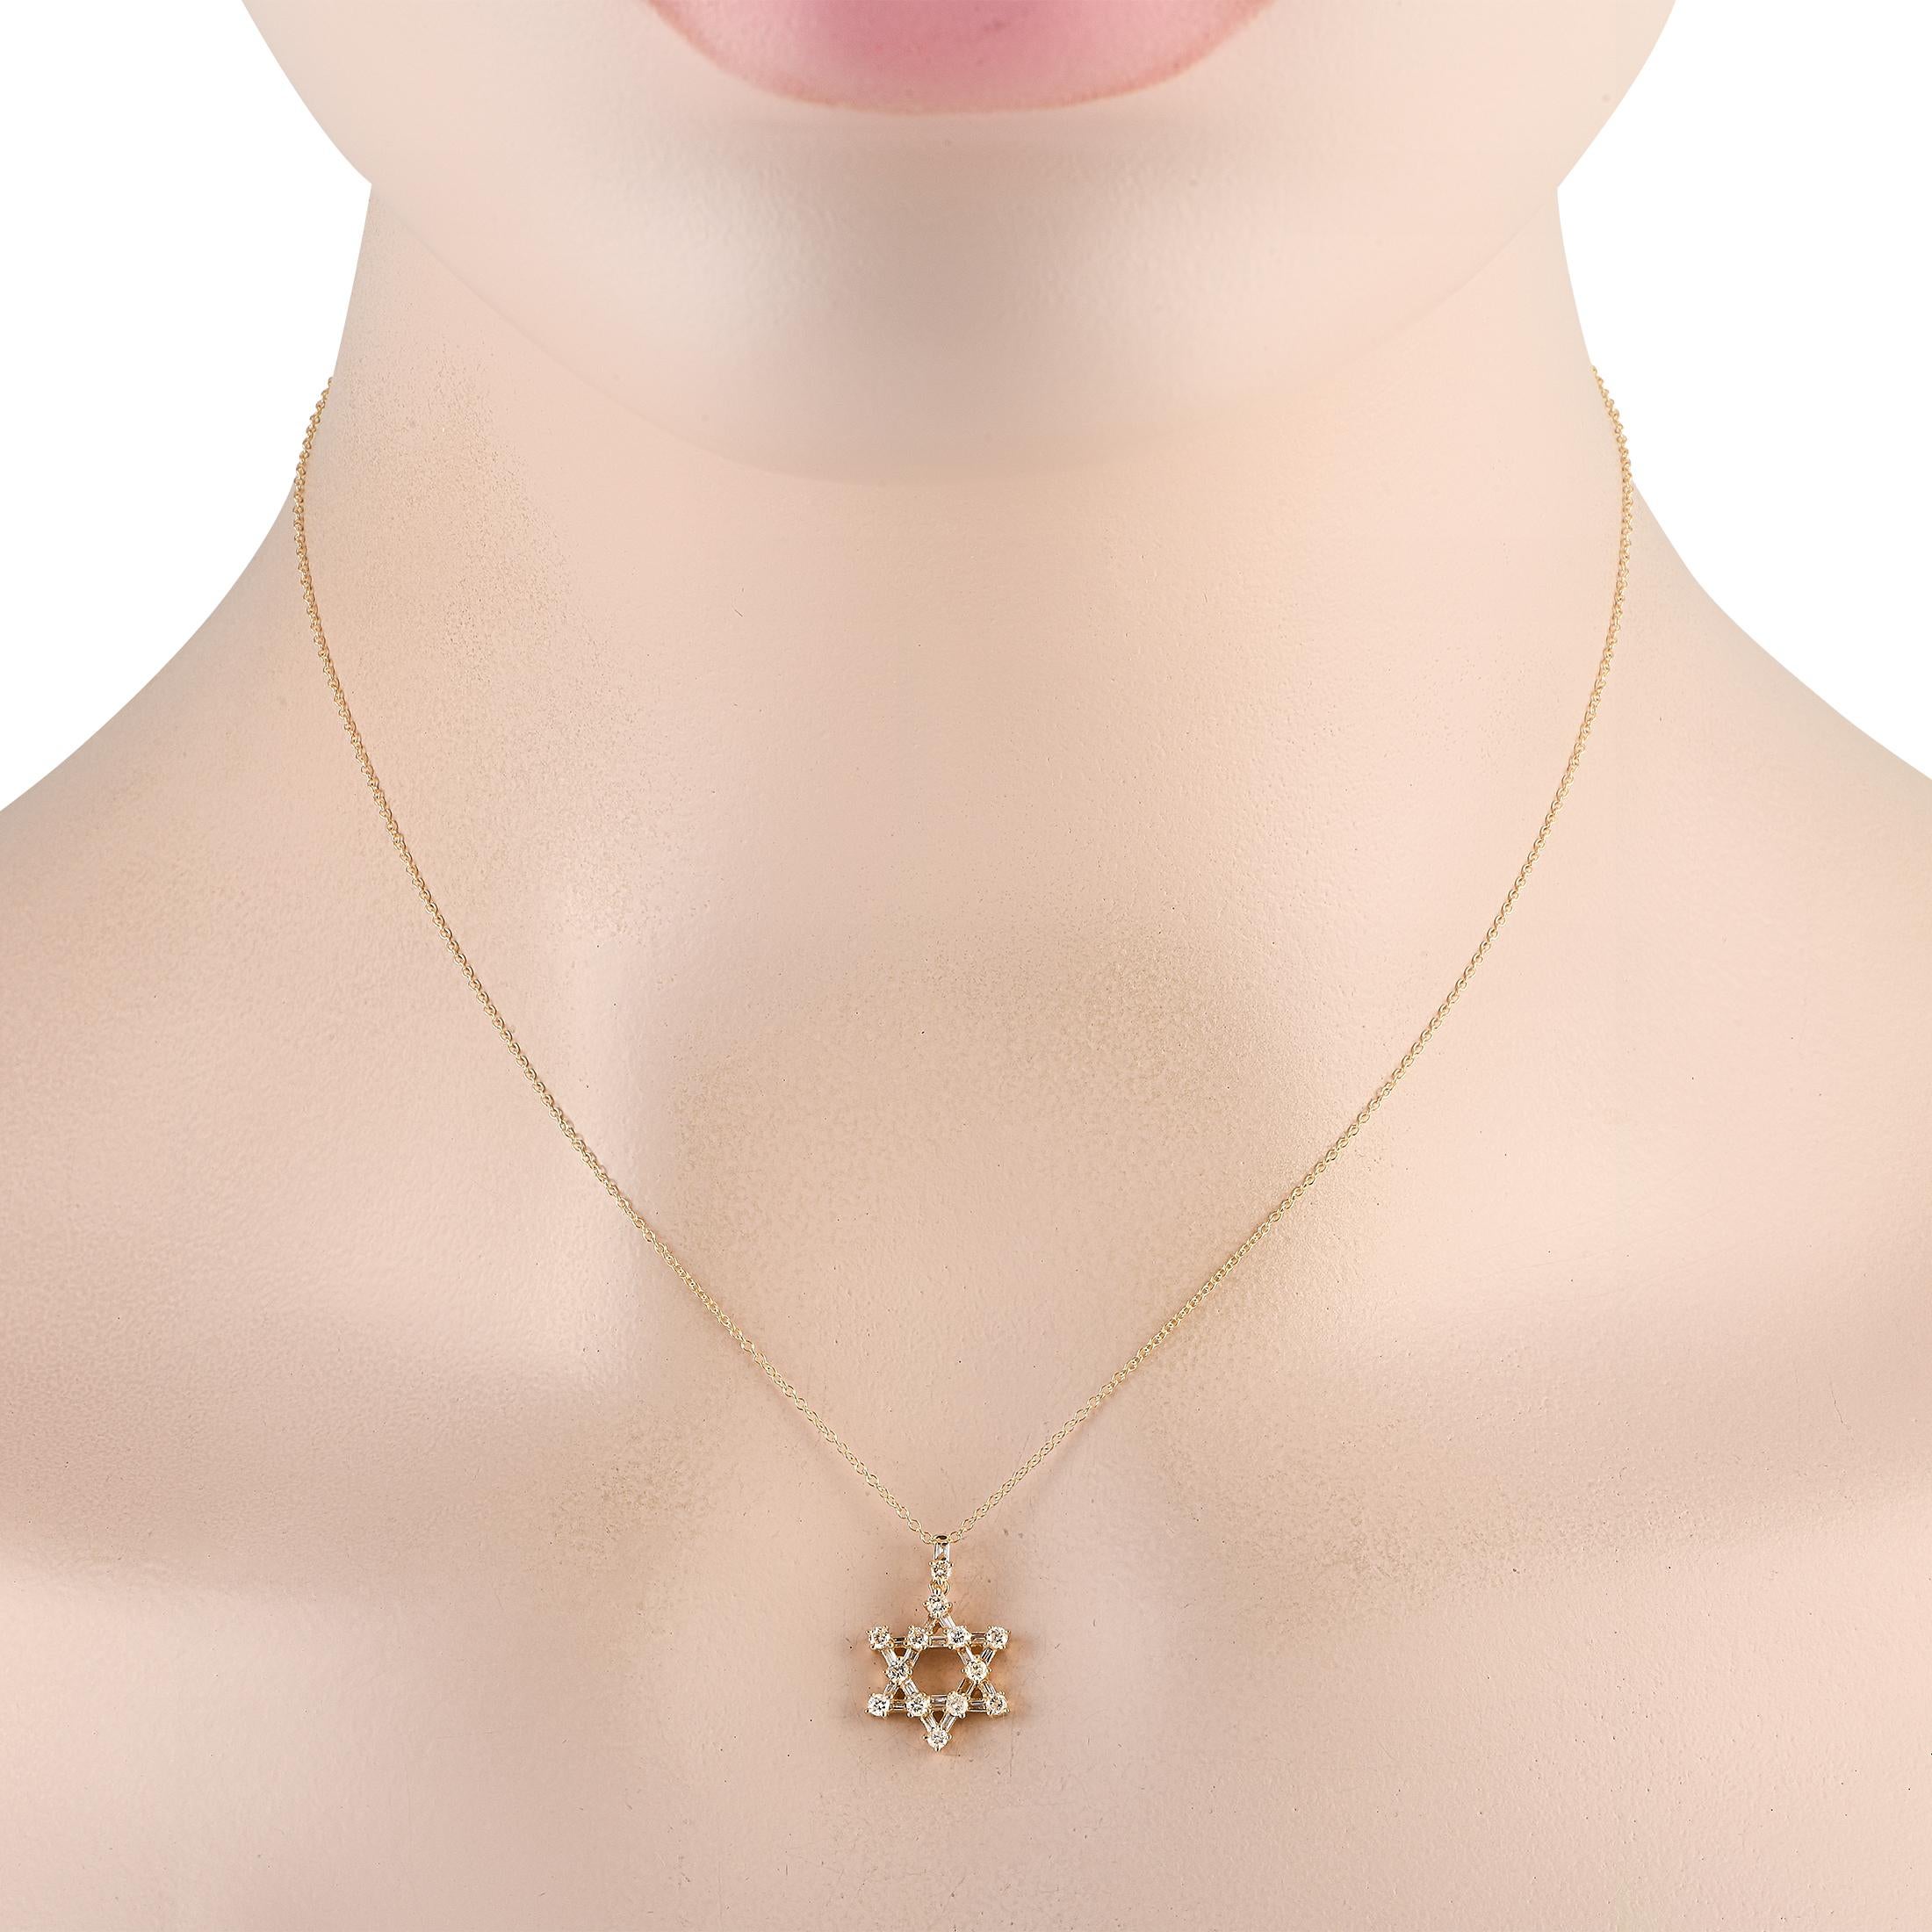 Do you prefer to wear the same minimalist jewelry day after day? Do it in style by picking this hexagram necklace. It features a thin chain in 14K yellow gold holding a six-pointed star pendant measuring less than half an inch. The yellow gold star